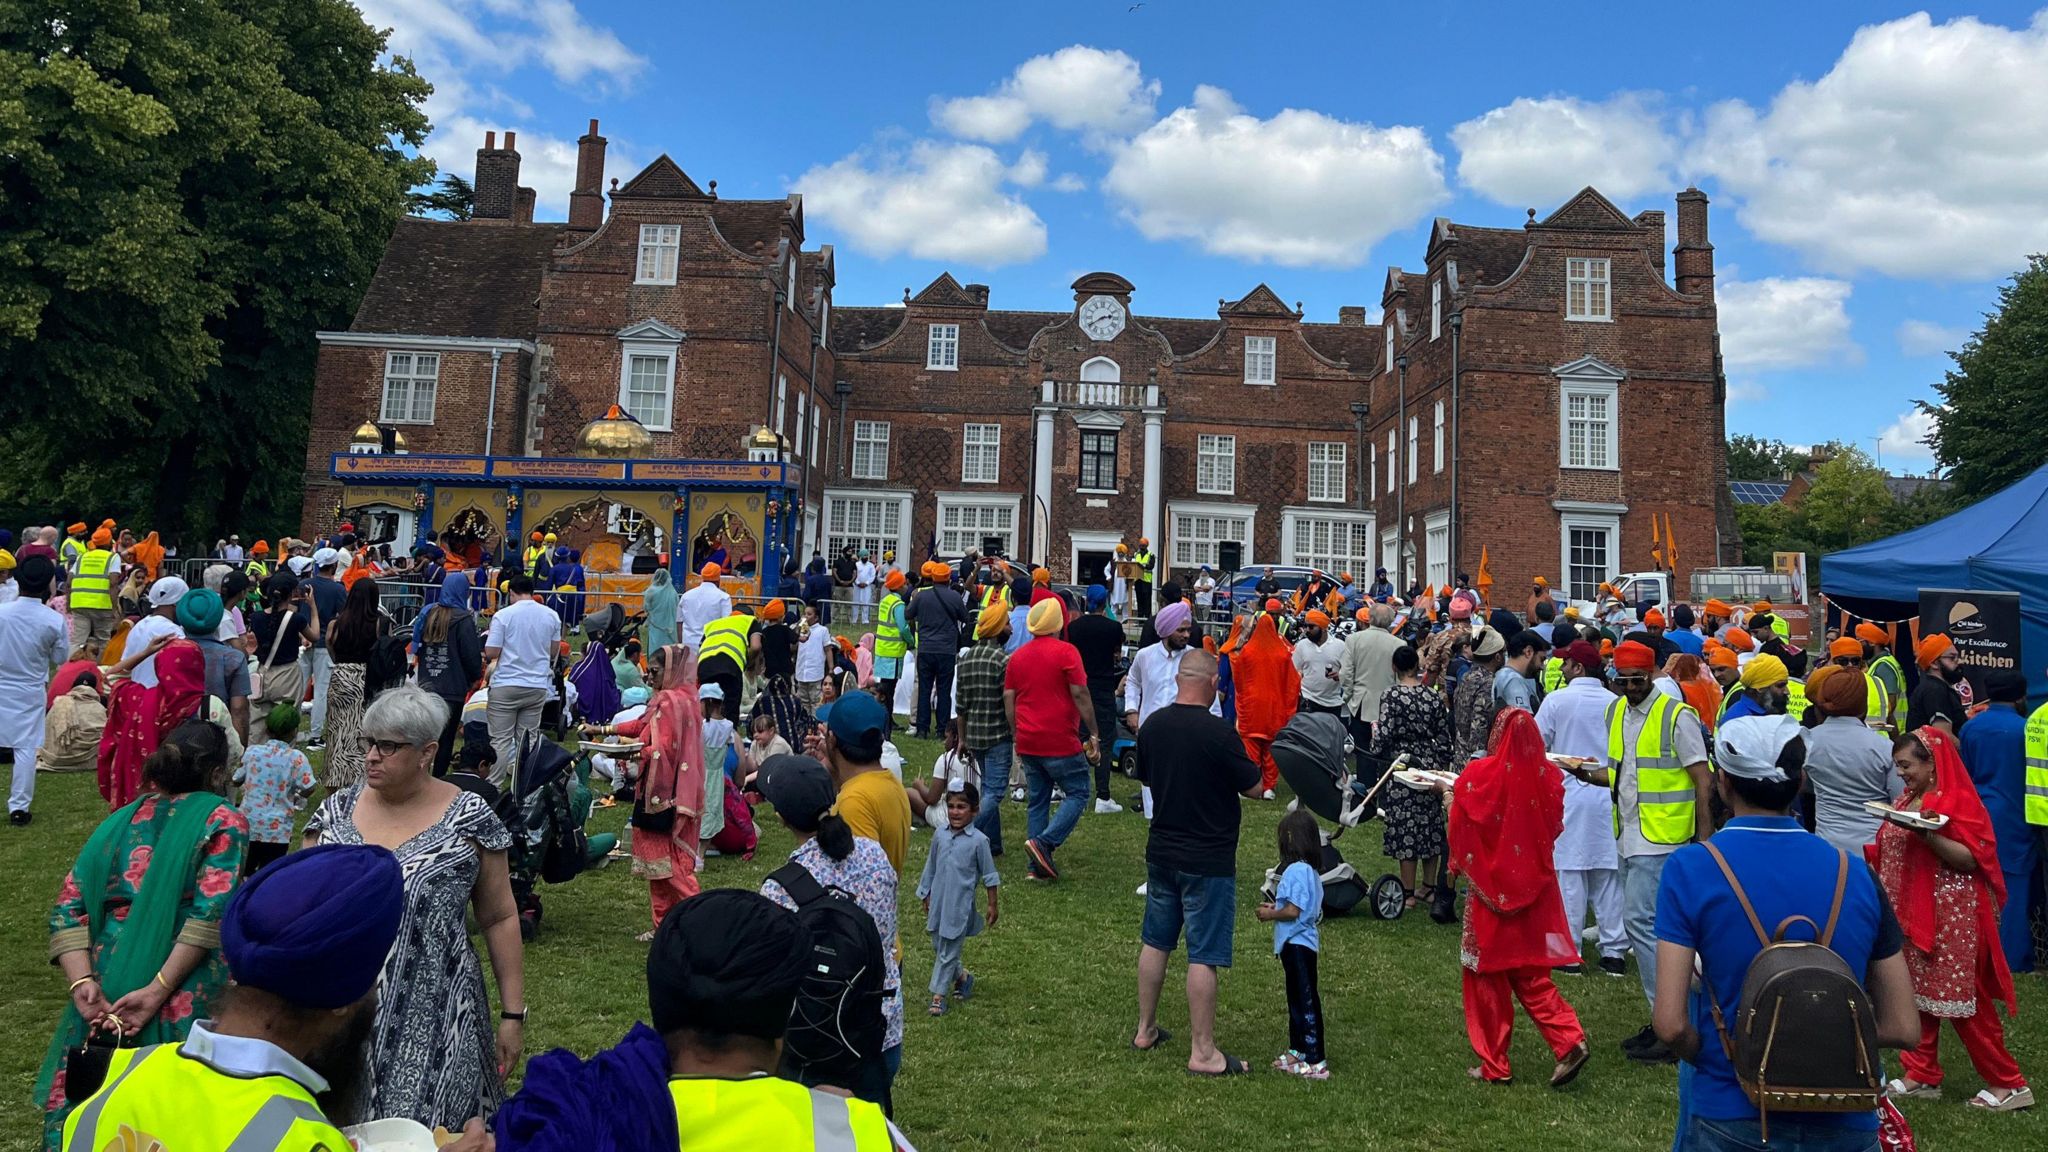 A crowd of people from different nationalities in front of a tudor mansion, with a Sikh float in the background